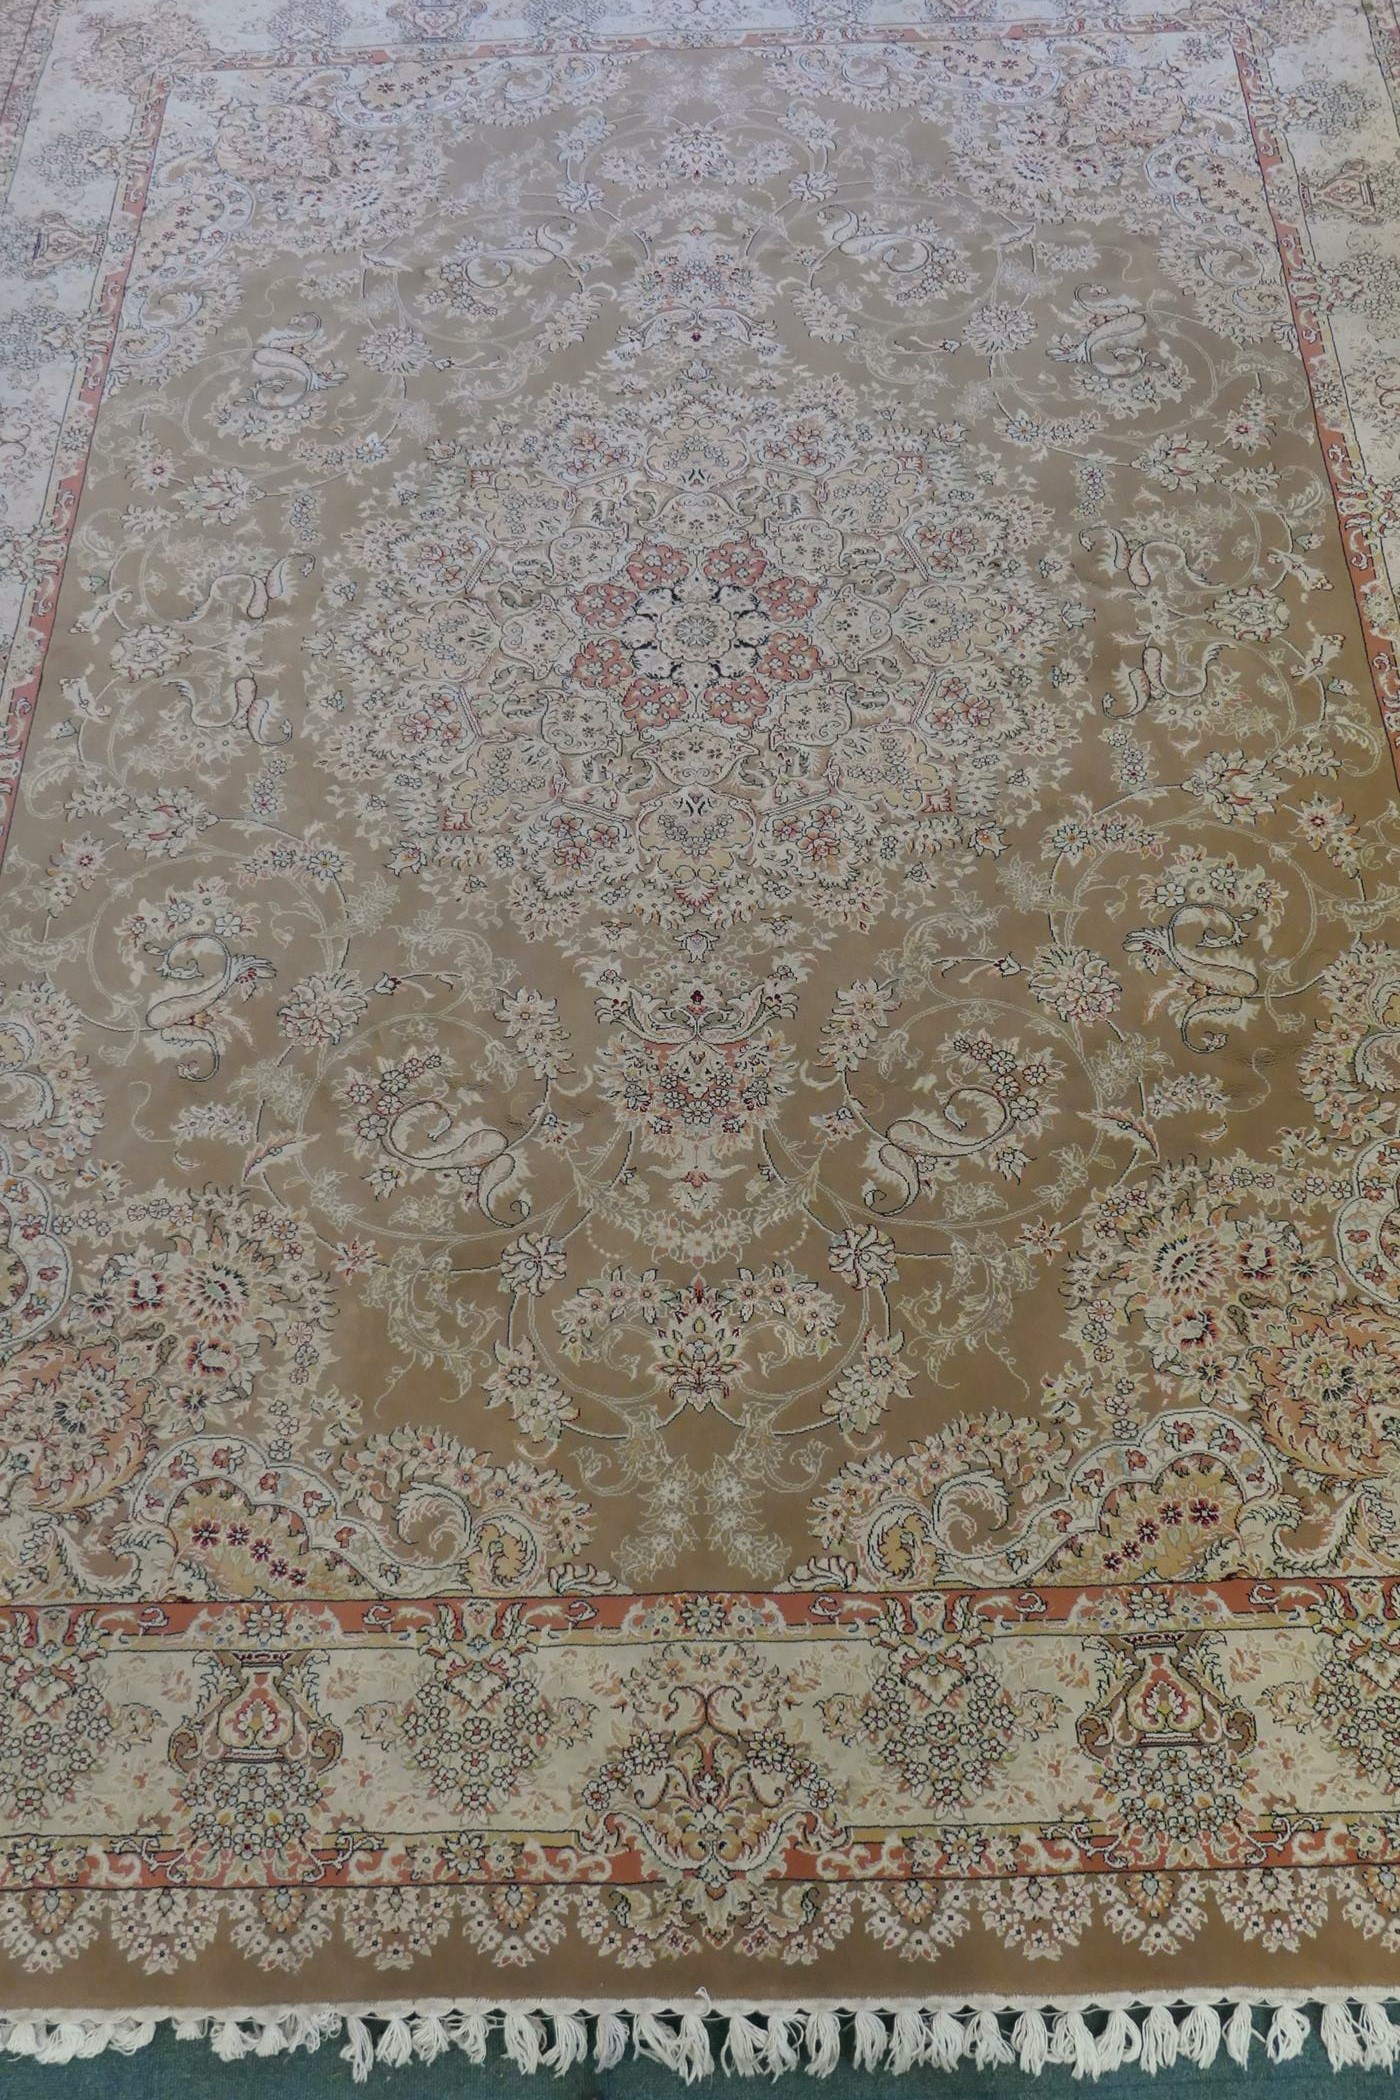 A large fine woven Iranian carpet with bespoke floral design on a buff coloured ground, 300 x 390cm - Image 2 of 6